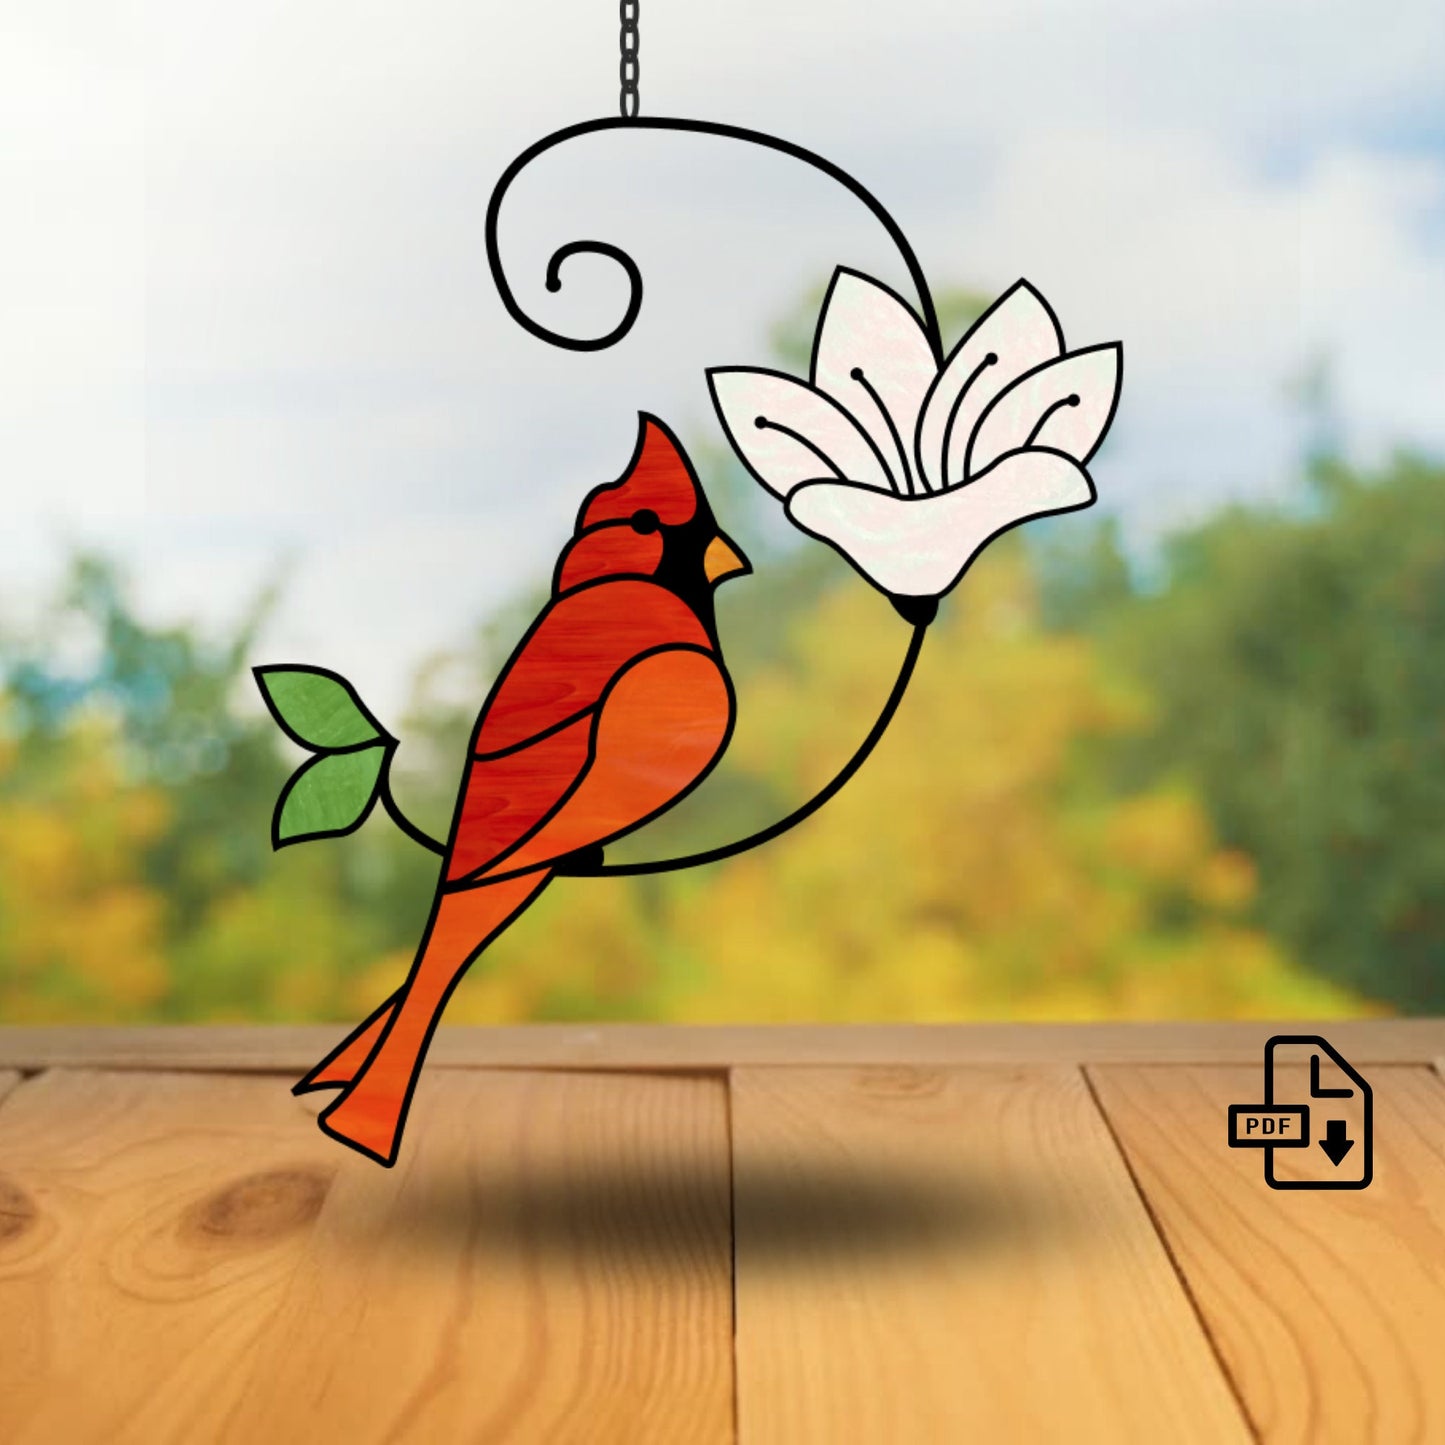 Red Cardinal Stained Glass Suncatcher Pattern